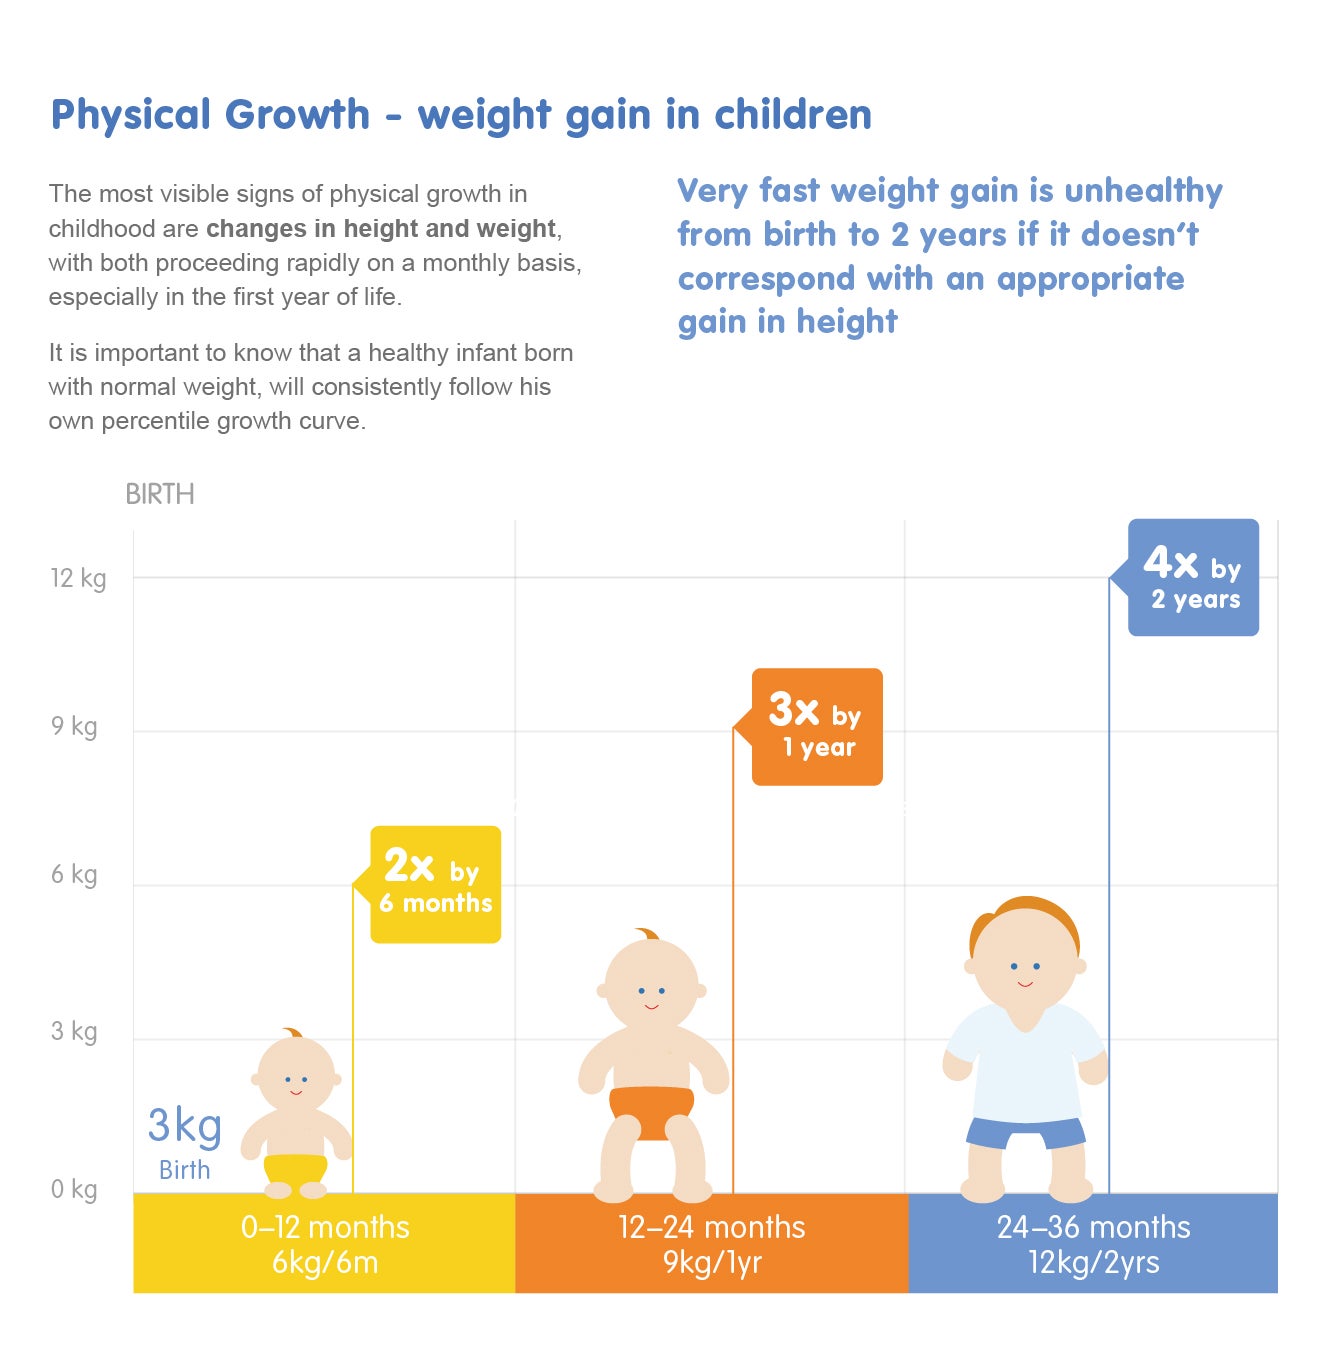 Infographic of children's weight gain. At 6 months they double their initial weight. At 1 year they triple and 2 years they quadruple. If a baby is born with 3kg, at 6 months he will be 6kg, at 1 year he will be 9kg, and at 2 years he will be 12kg.